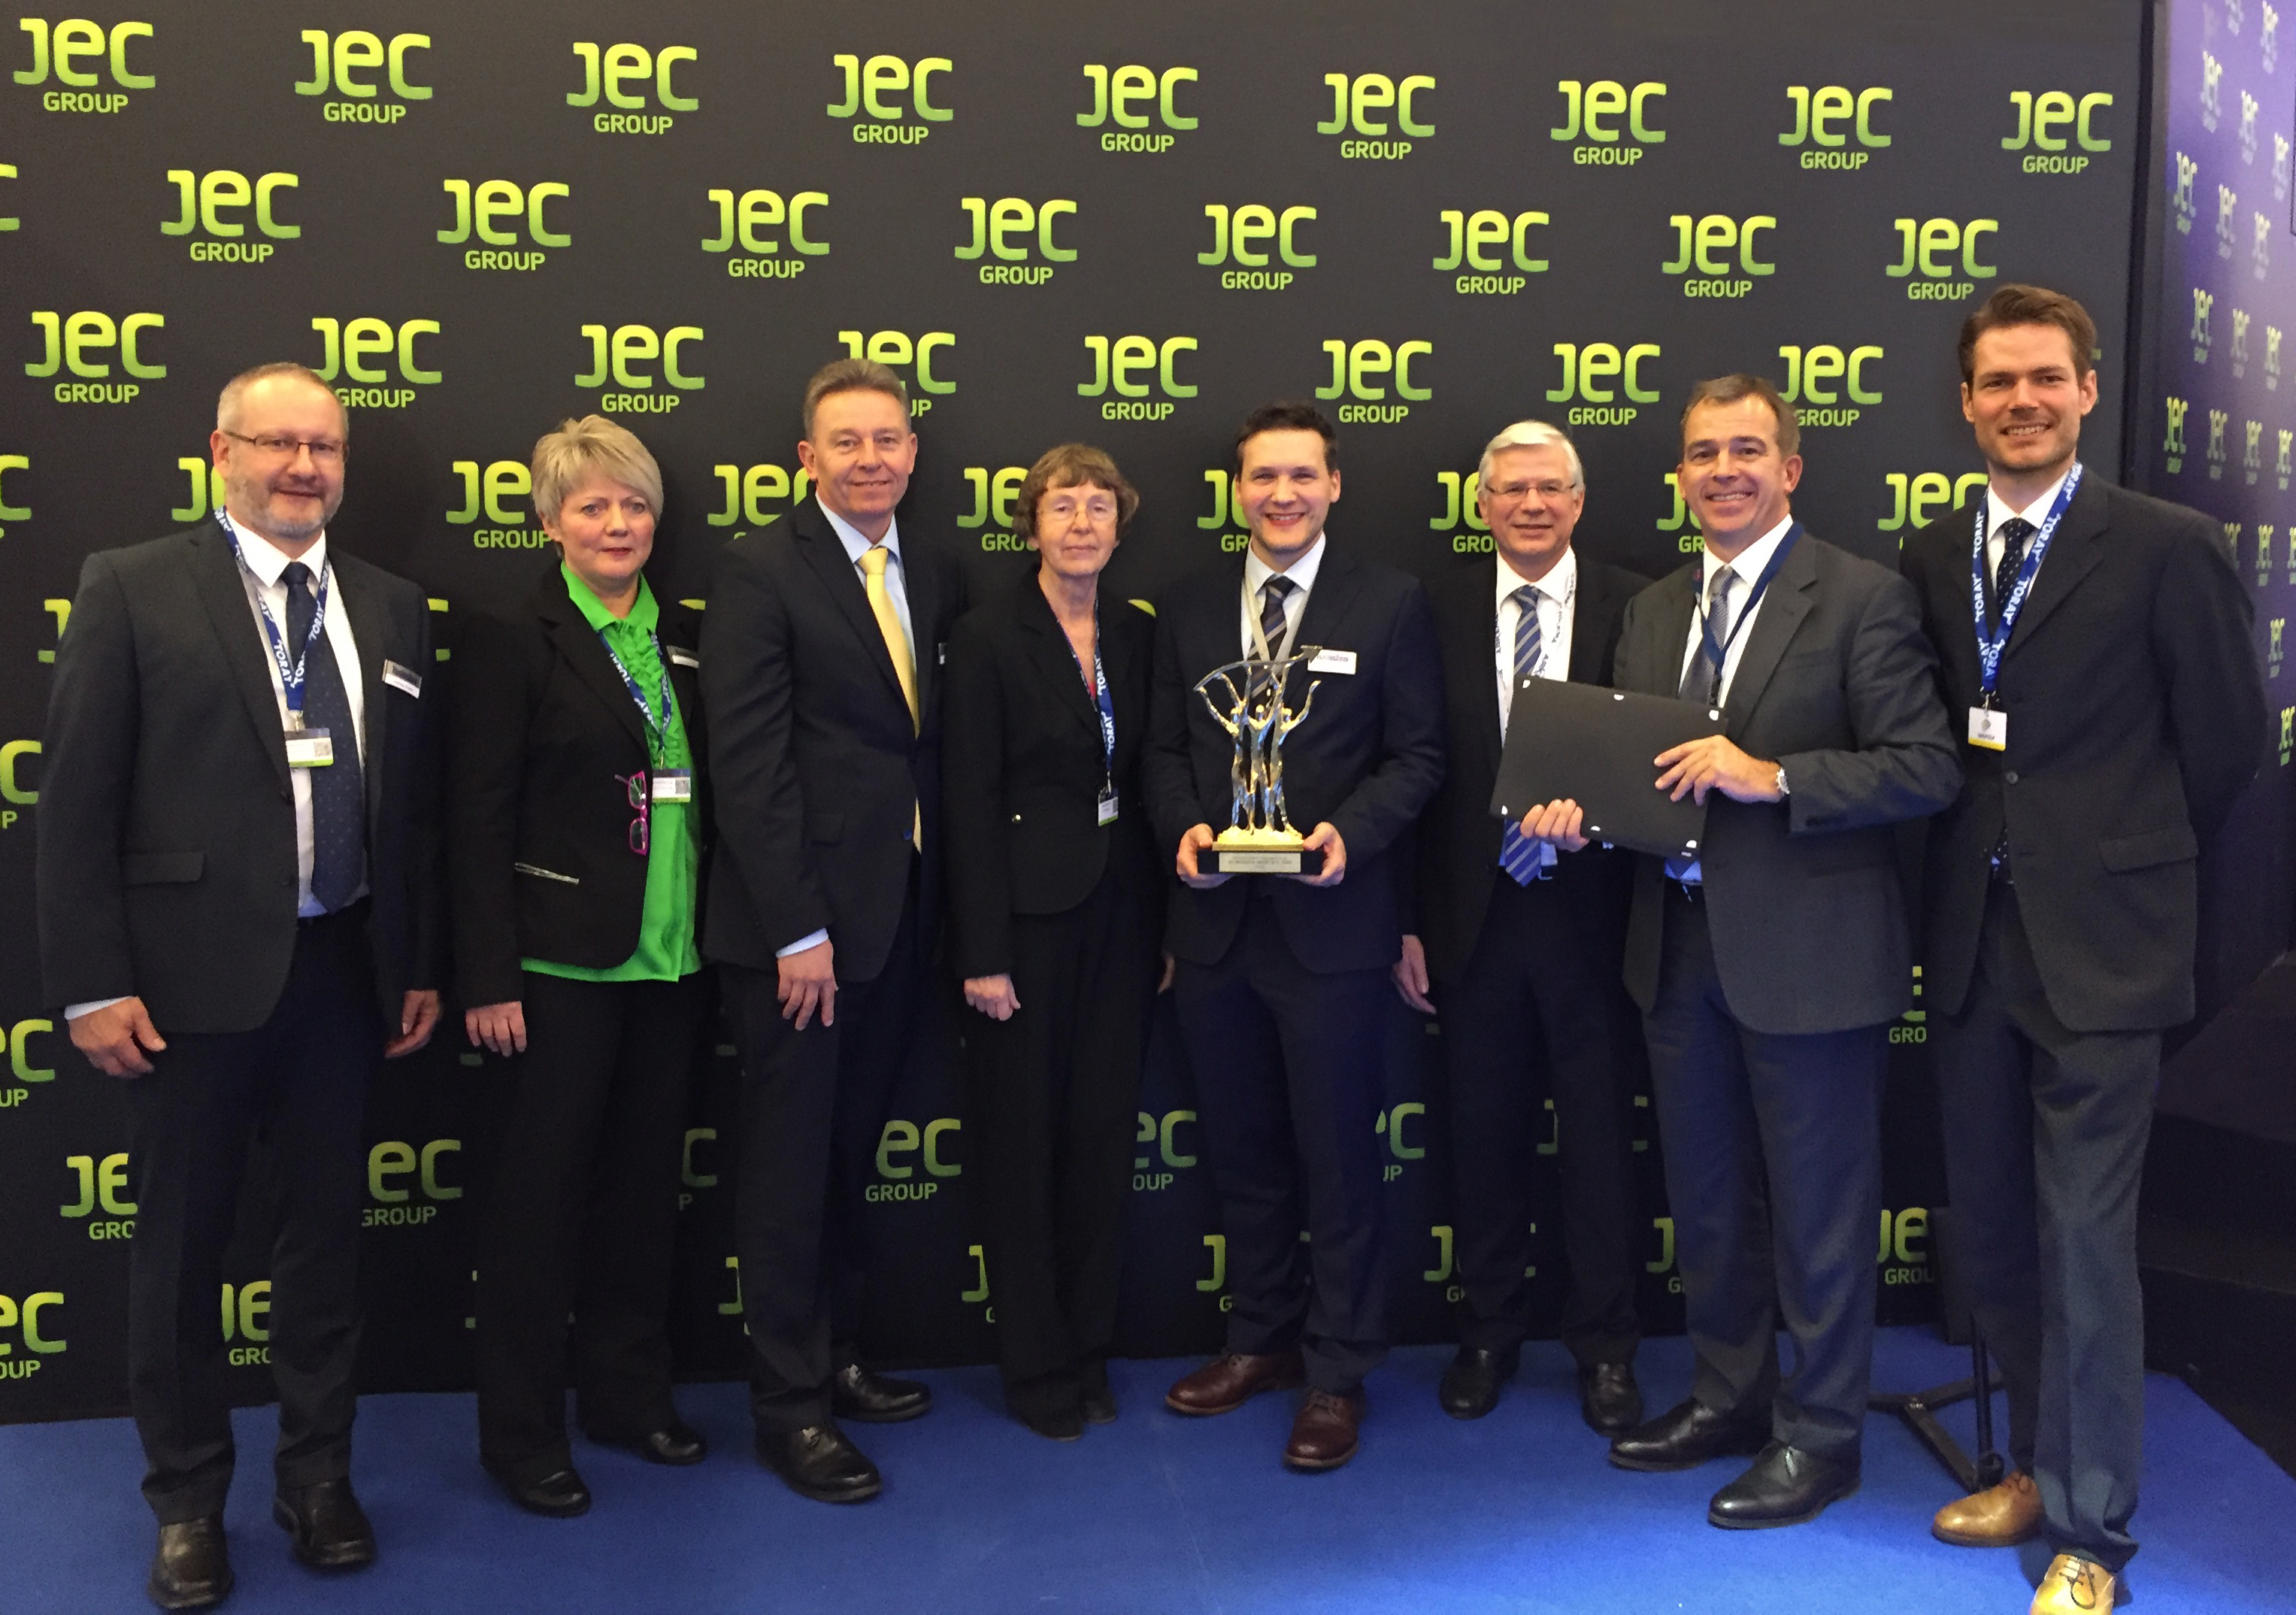 The celebration of the JEC award winners took place on 8 March2016 at the JEC World conference in Paris. © Textechno